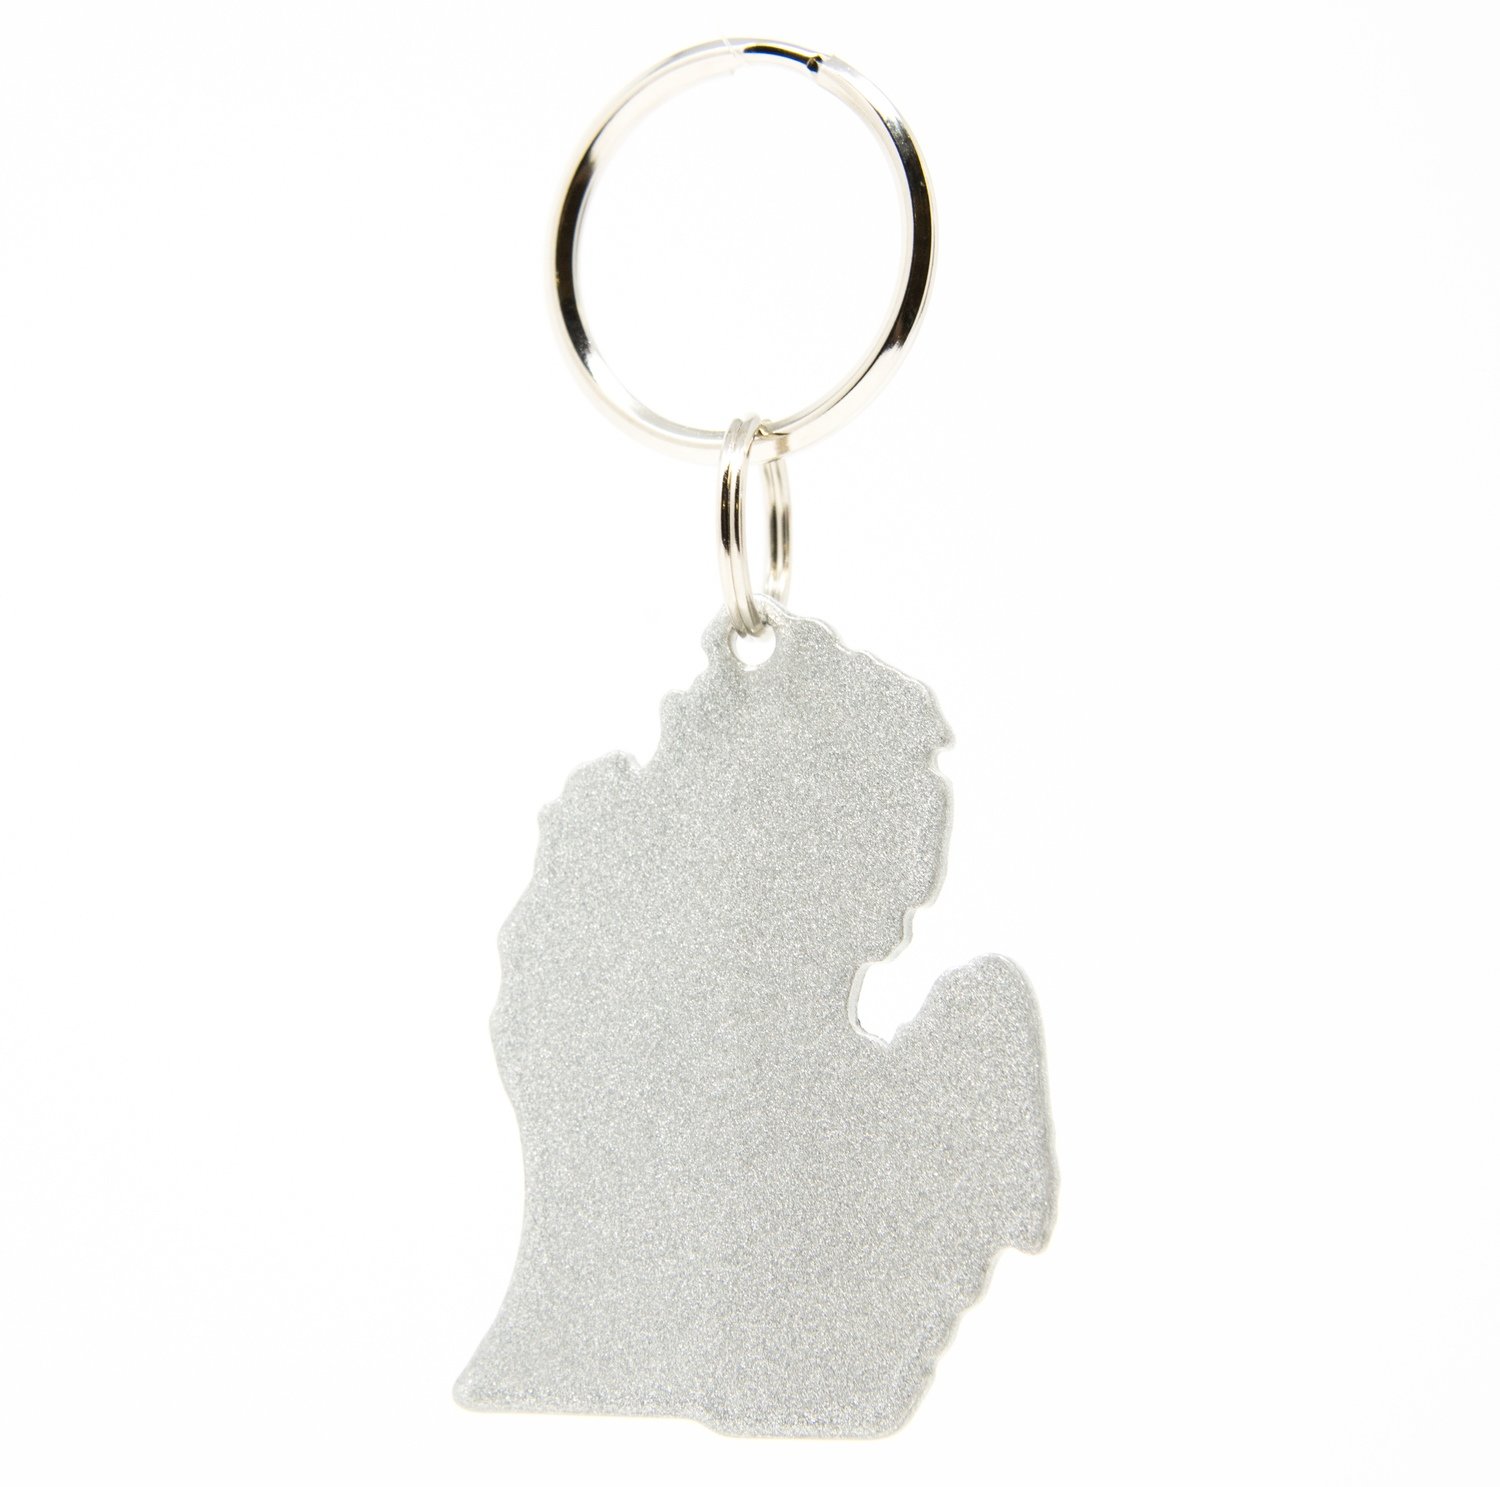 LOWER PENINSULA KEYCHAIN - SPARKLY SILVER